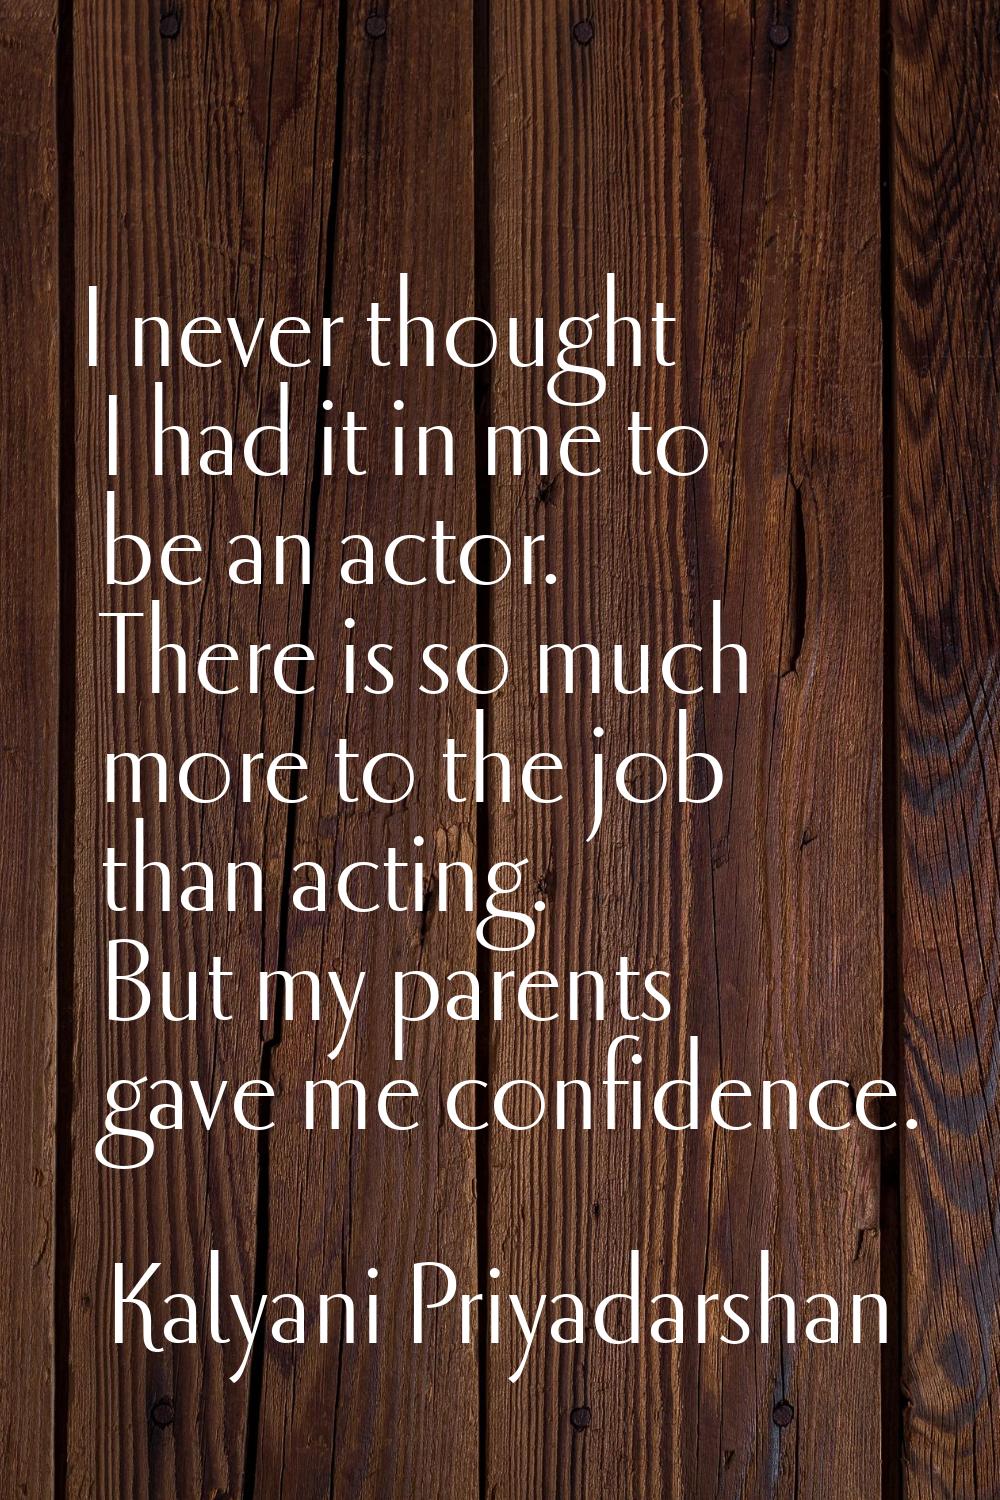 I never thought I had it in me to be an actor. There is so much more to the job than acting. But my